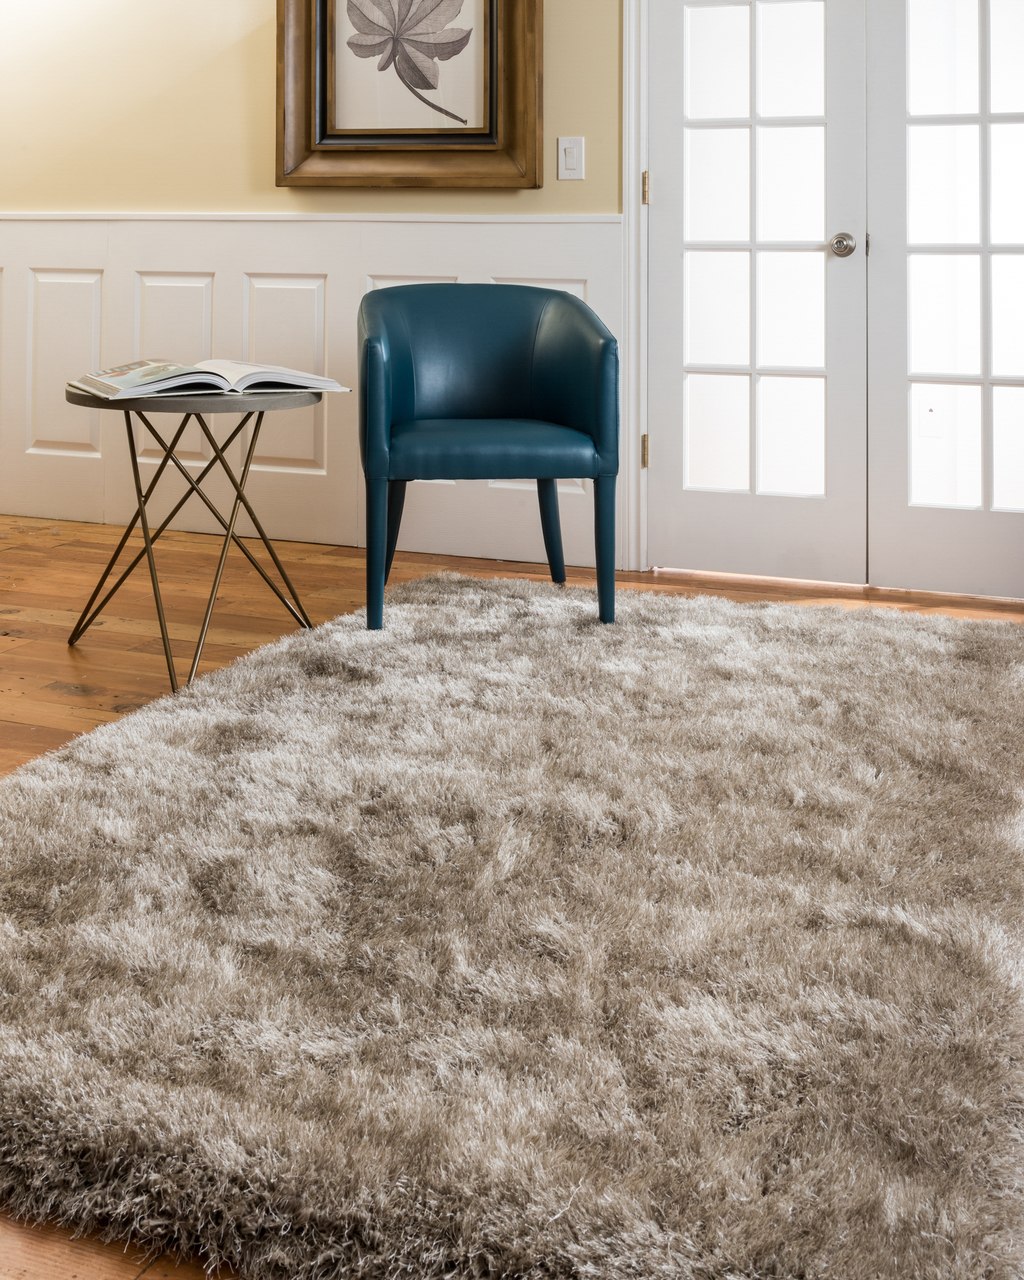 How to clean shag rugs?